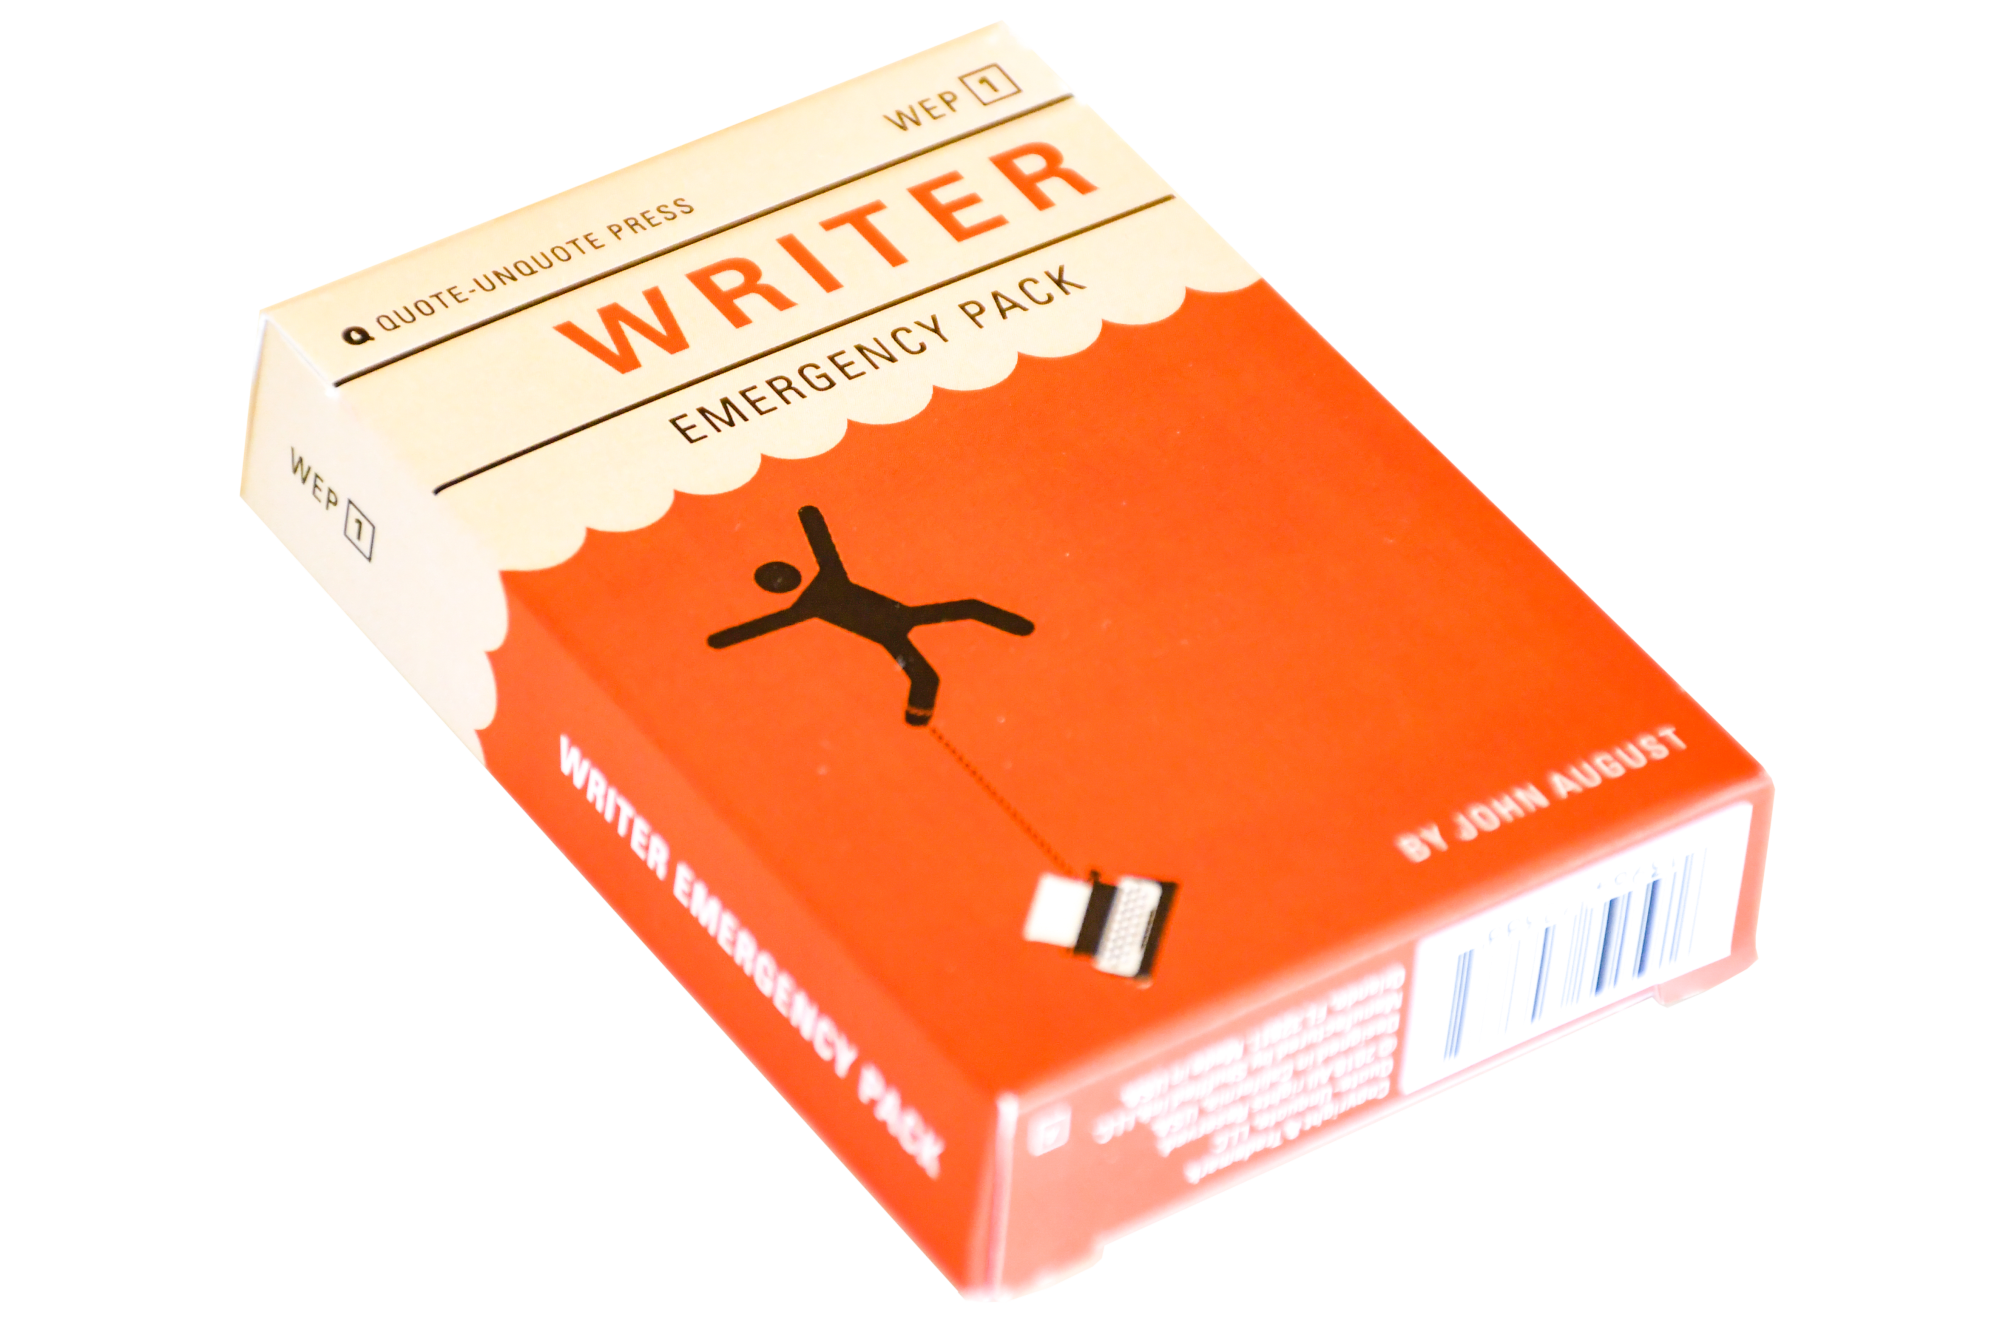 A writer emergency pack/deck of cards